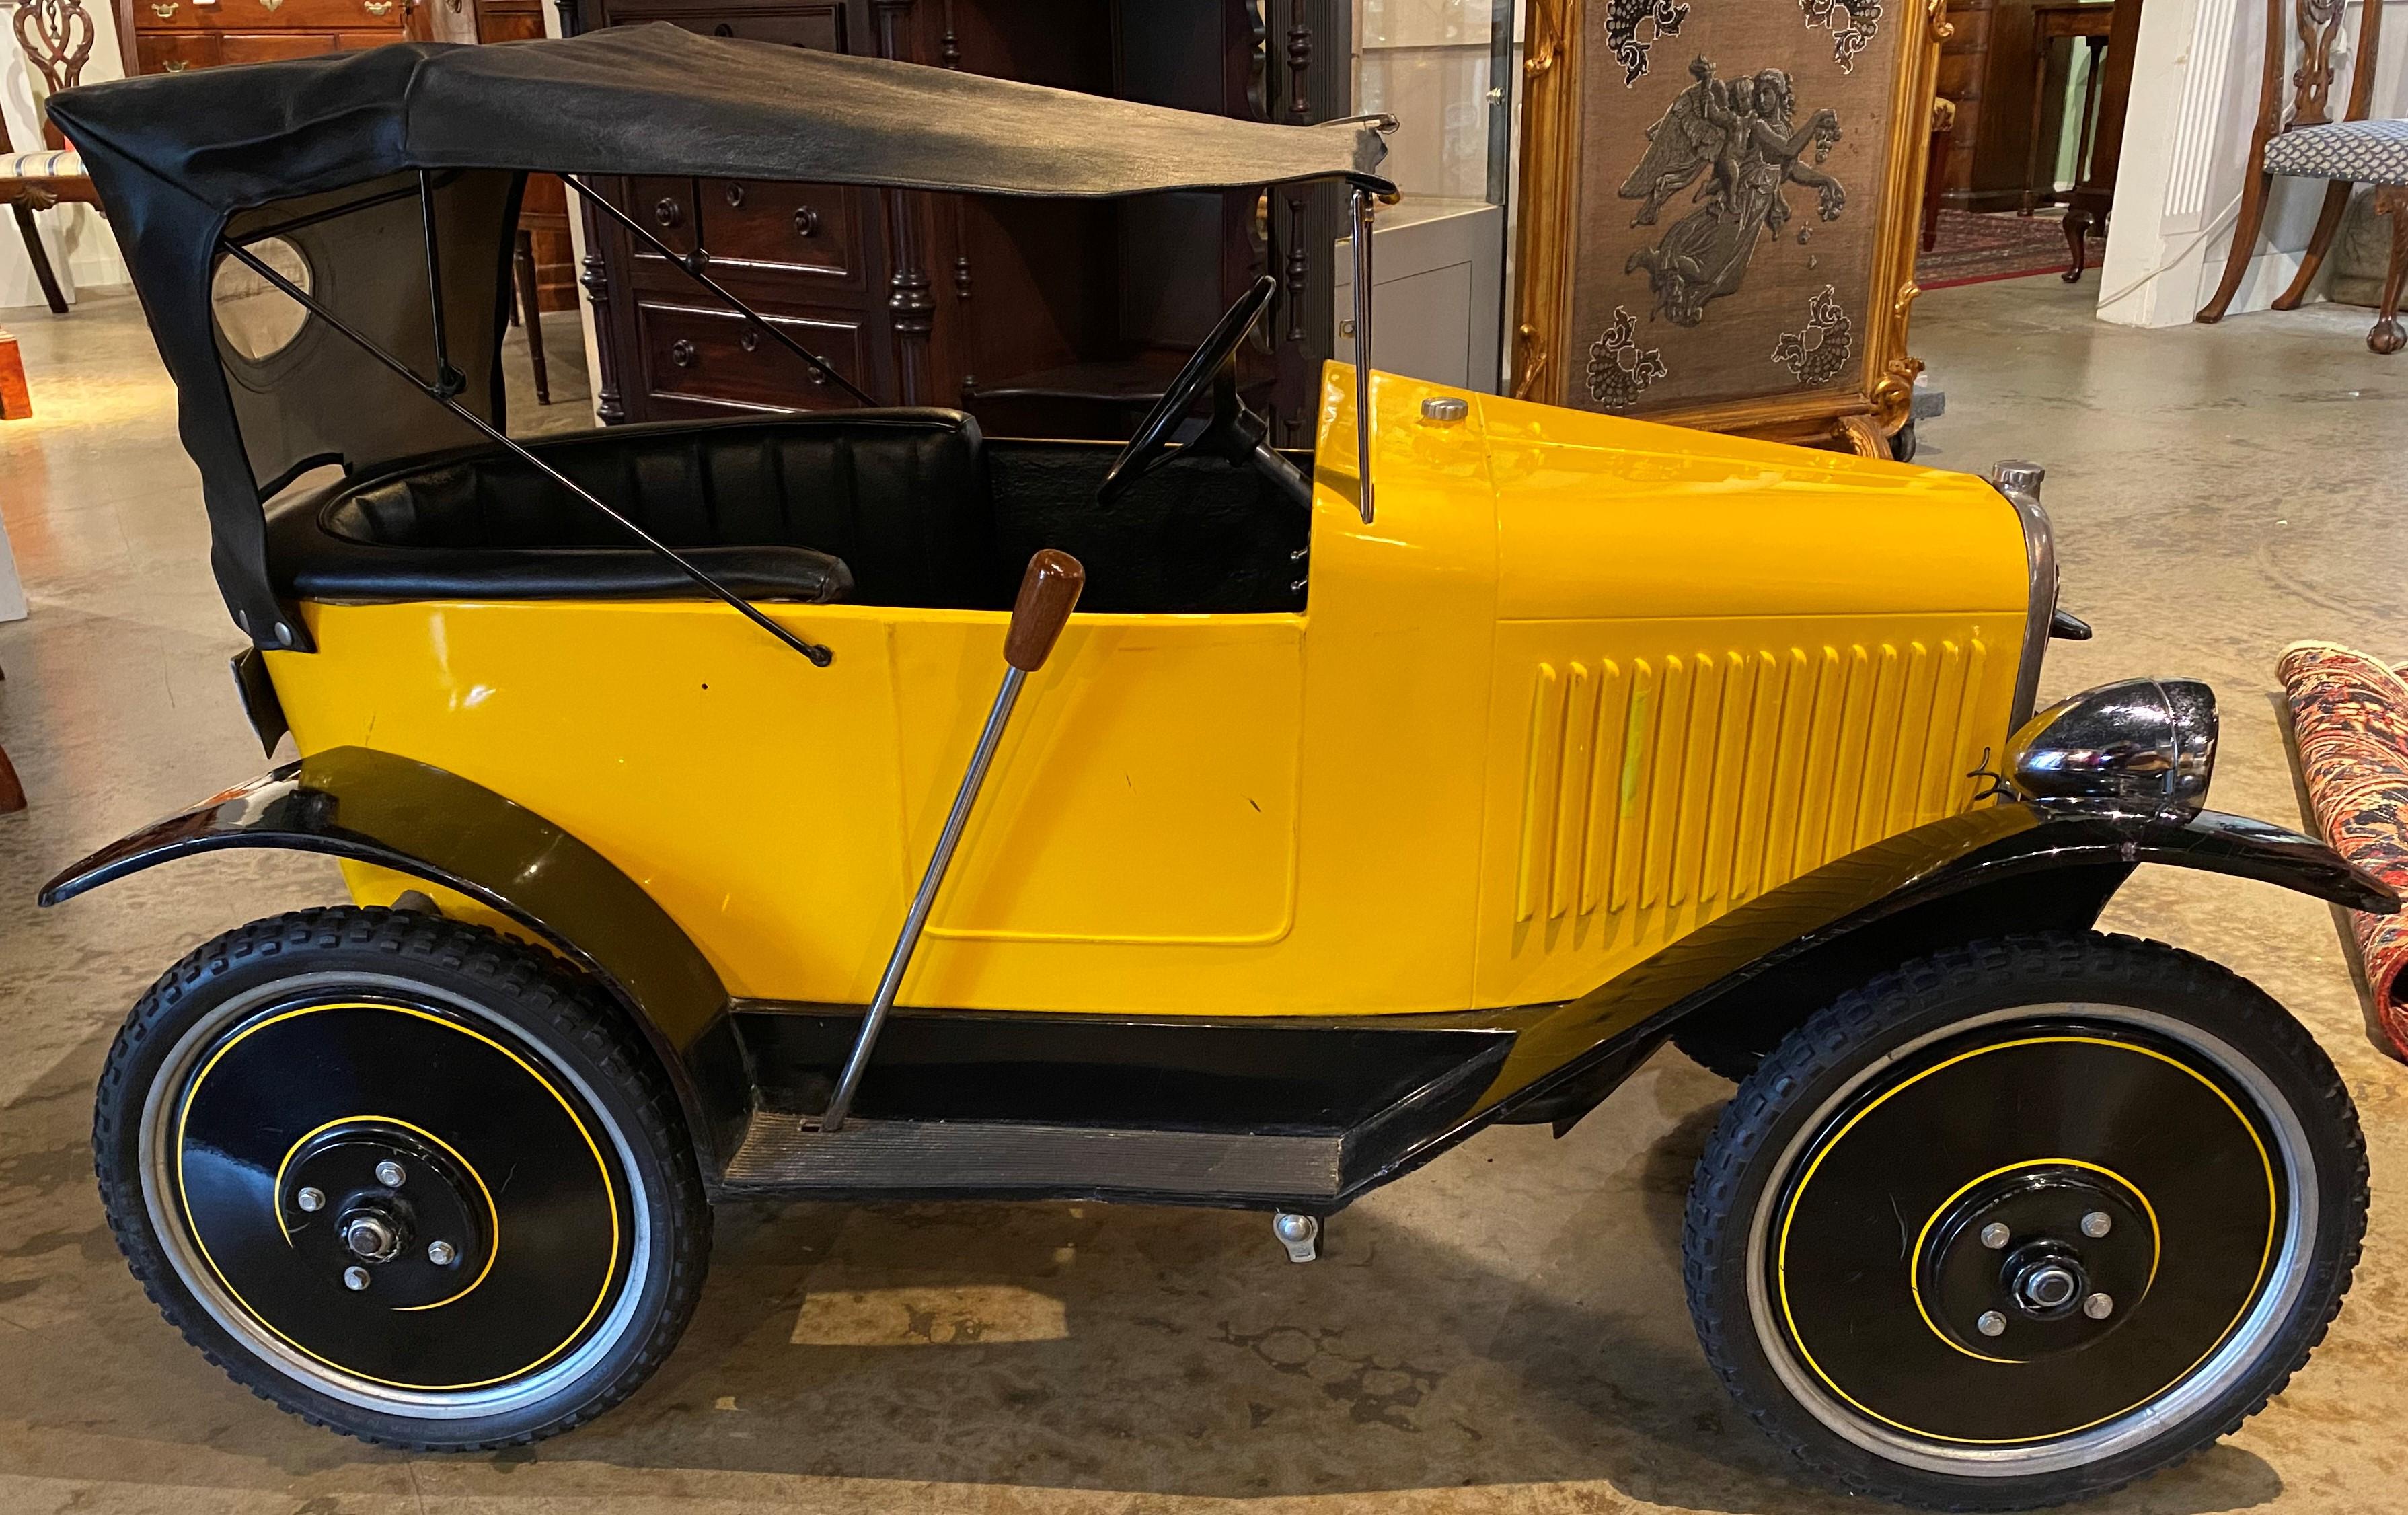 A fine example of a Citroen open seat touring pedal car in yellow and black #65, modeled after the 1920’s Citroen touring car, manufactured by Lely Small Car Co, England, with a badge on the wooden dashboard. This child’s pedal car dates to the